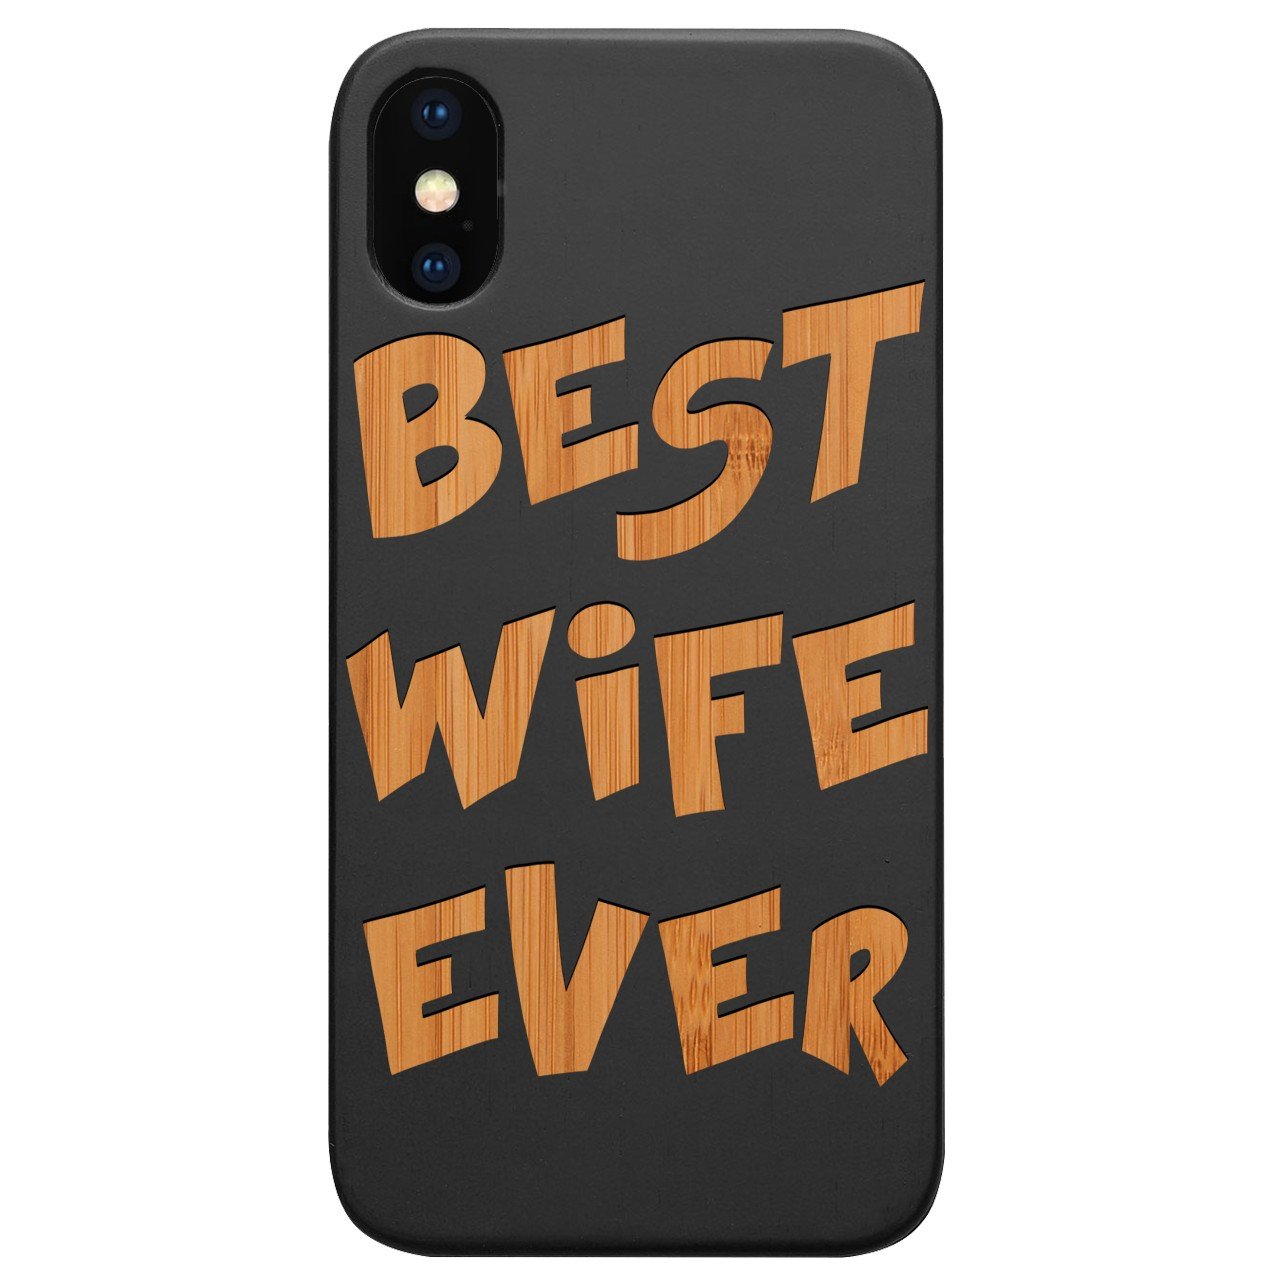 Best Wife Ever - Engraved - Wooden Phone Case